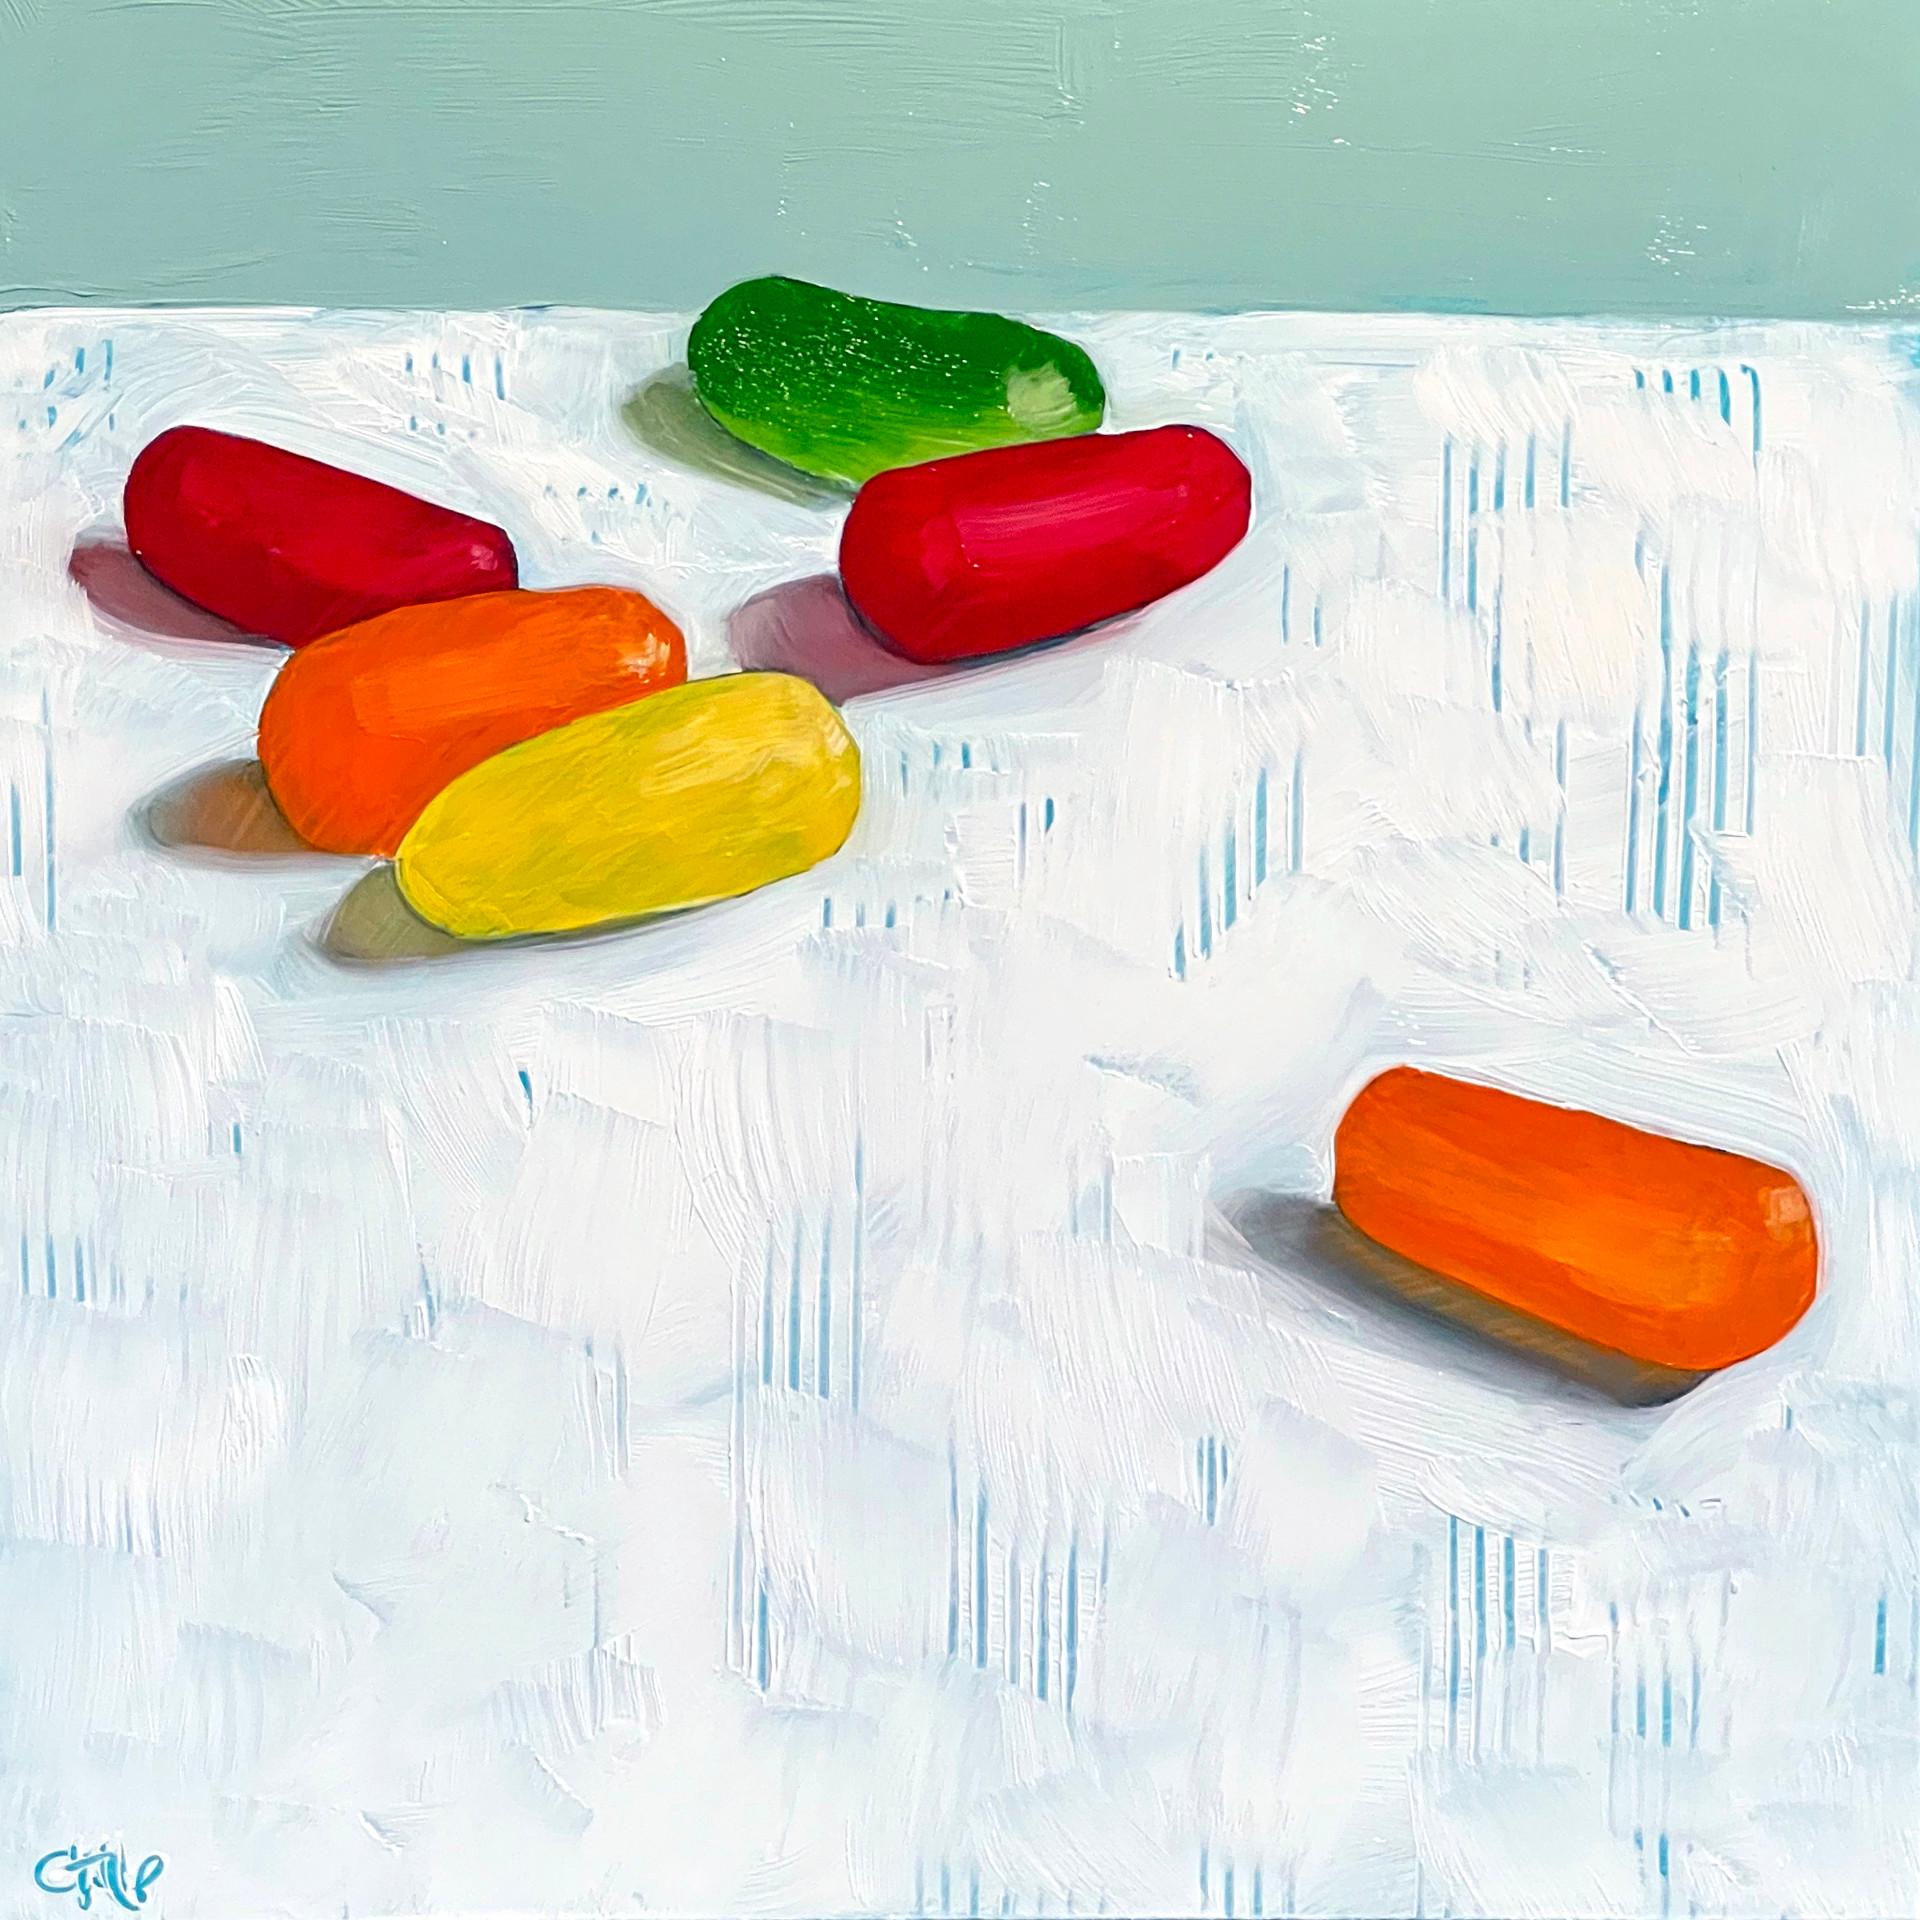 Christy Stallop Figurative Painting - Mike and Ike